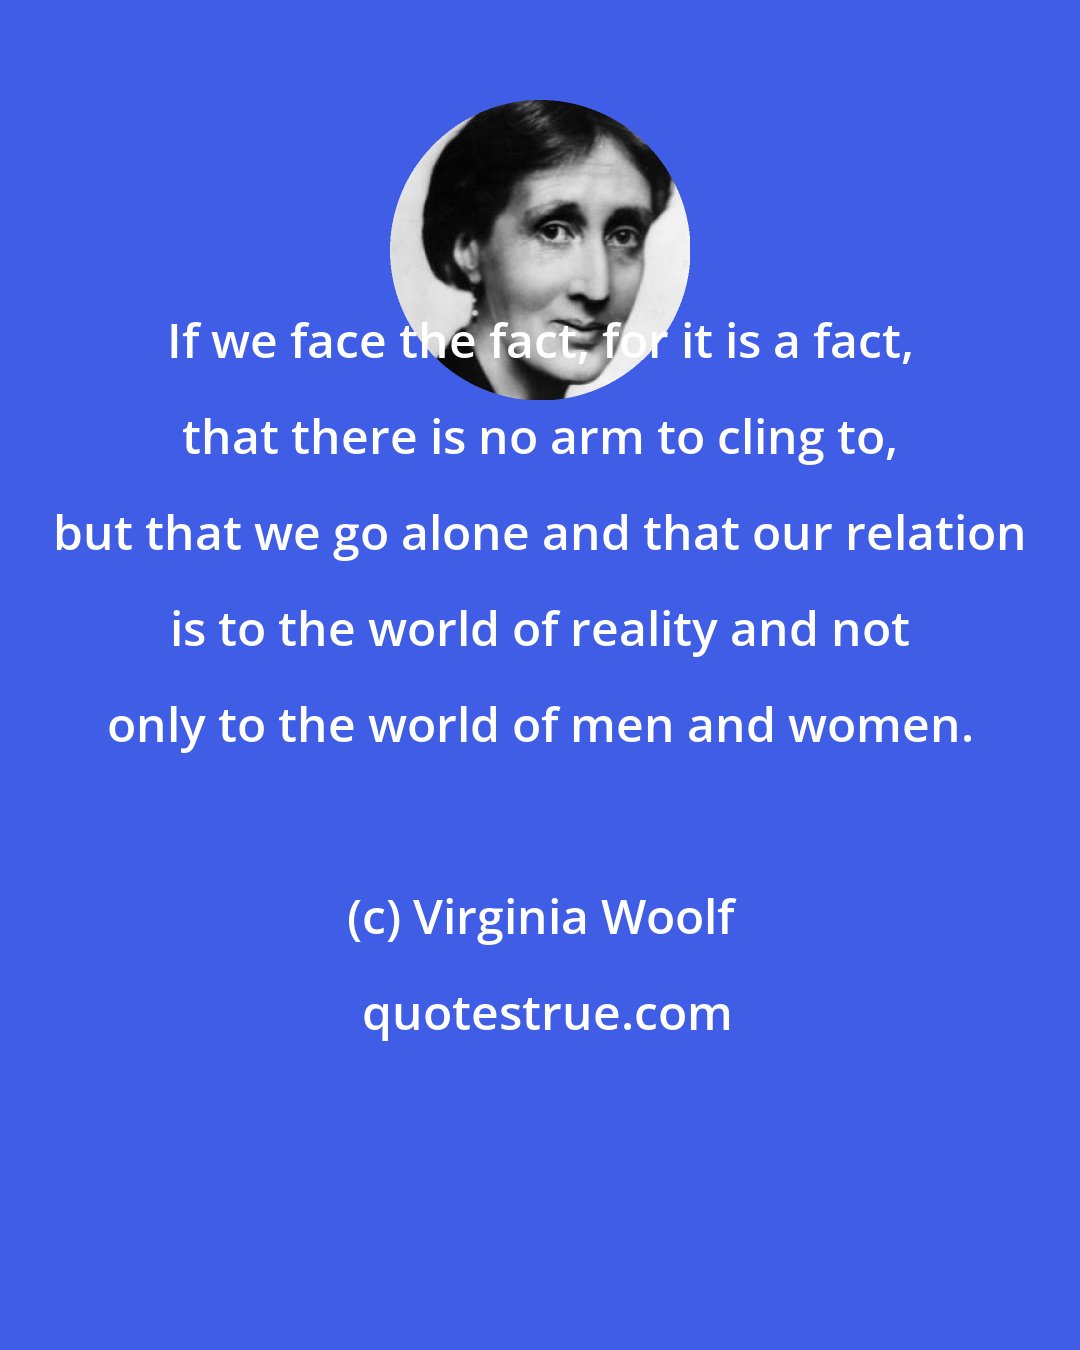 Virginia Woolf: If we face the fact, for it is a fact, that there is no arm to cling to, but that we go alone and that our relation is to the world of reality and not only to the world of men and women.